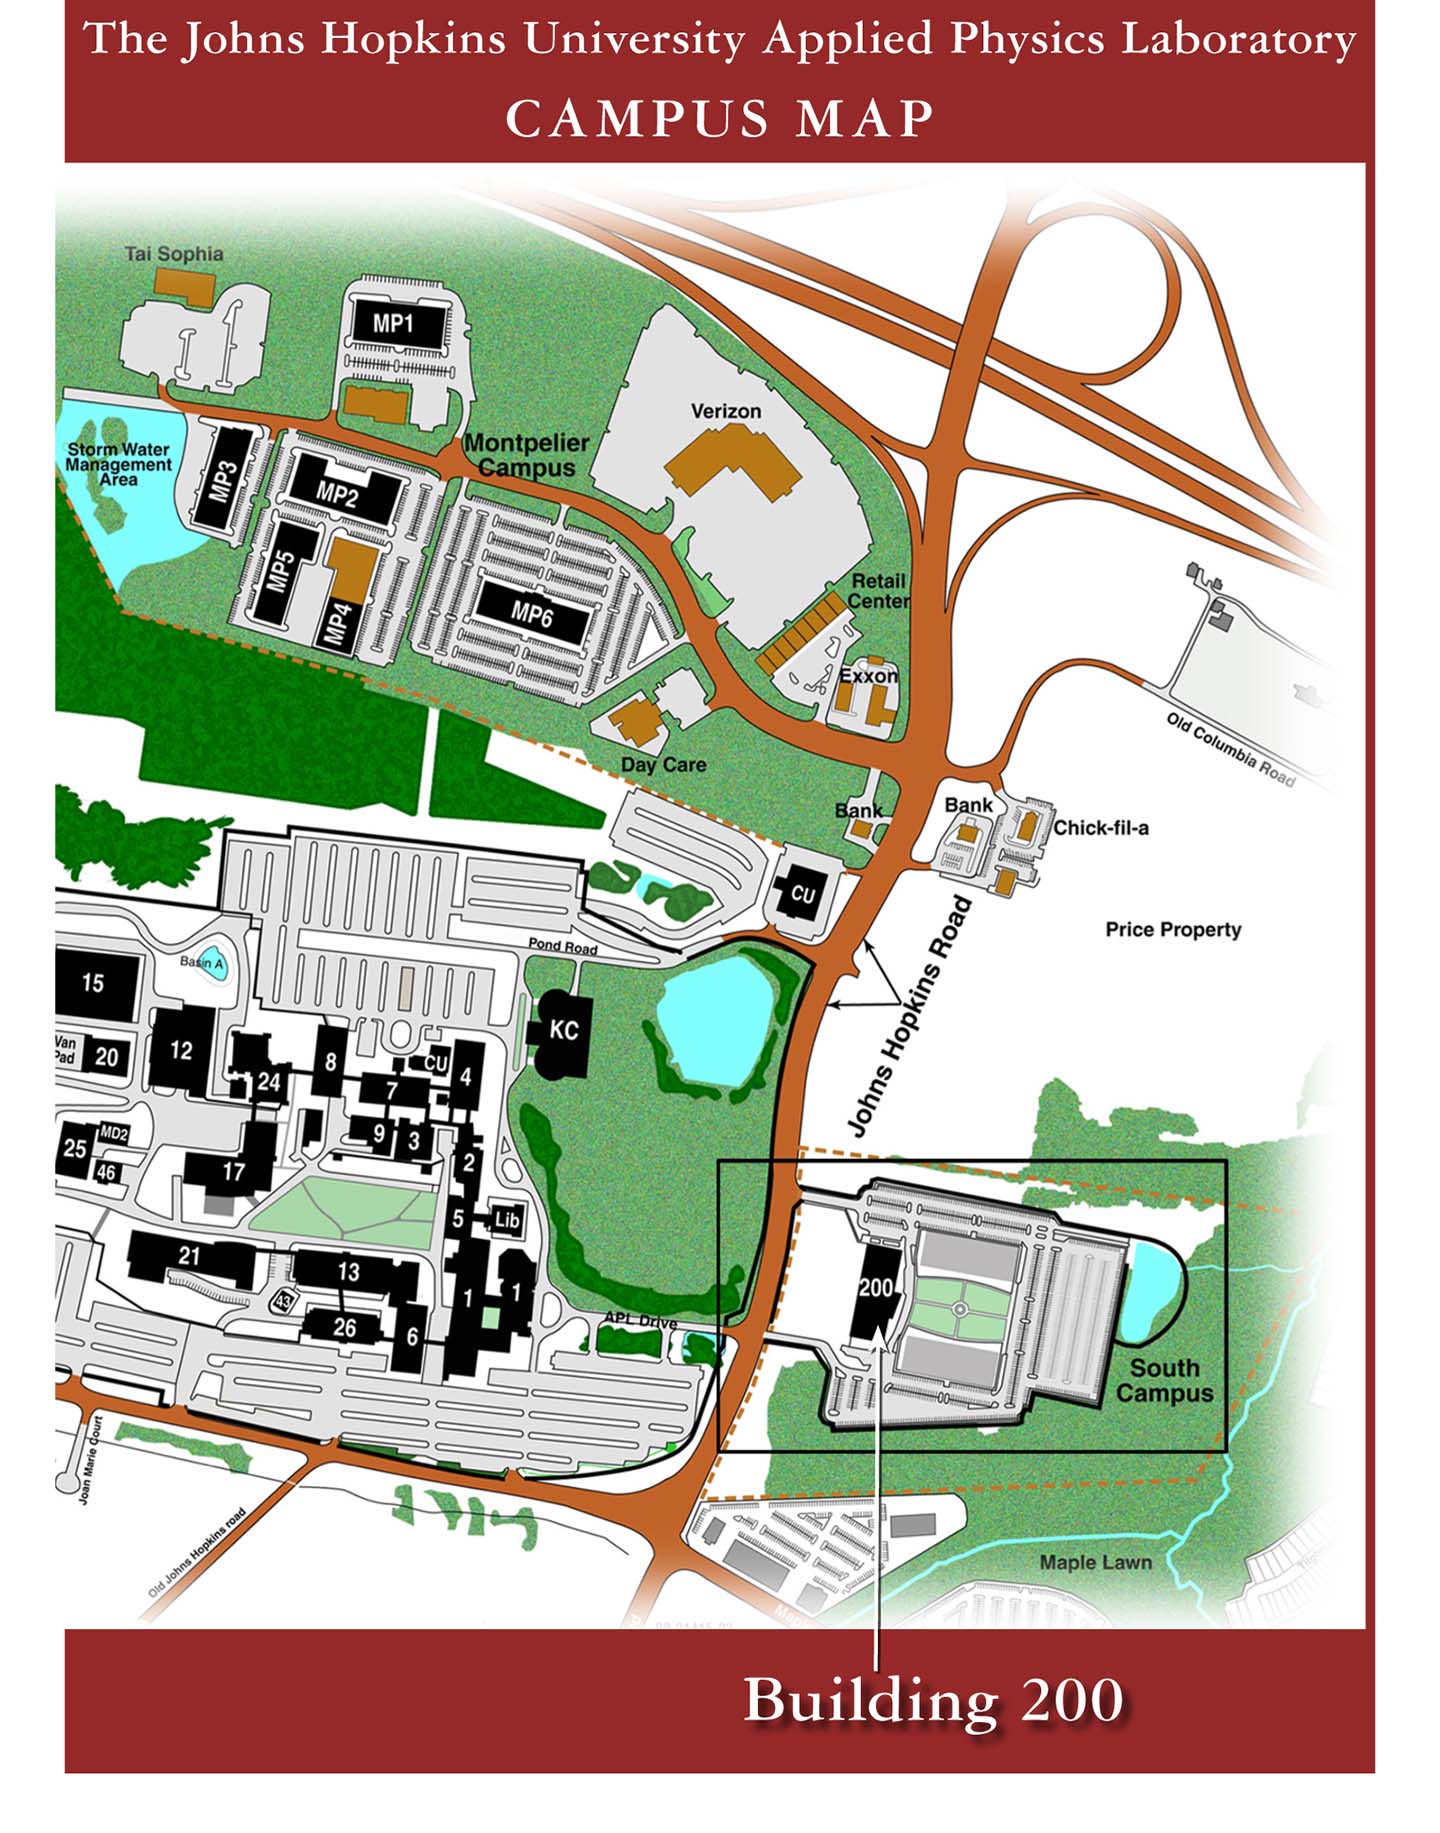 APL campus map showing future location of Building 200